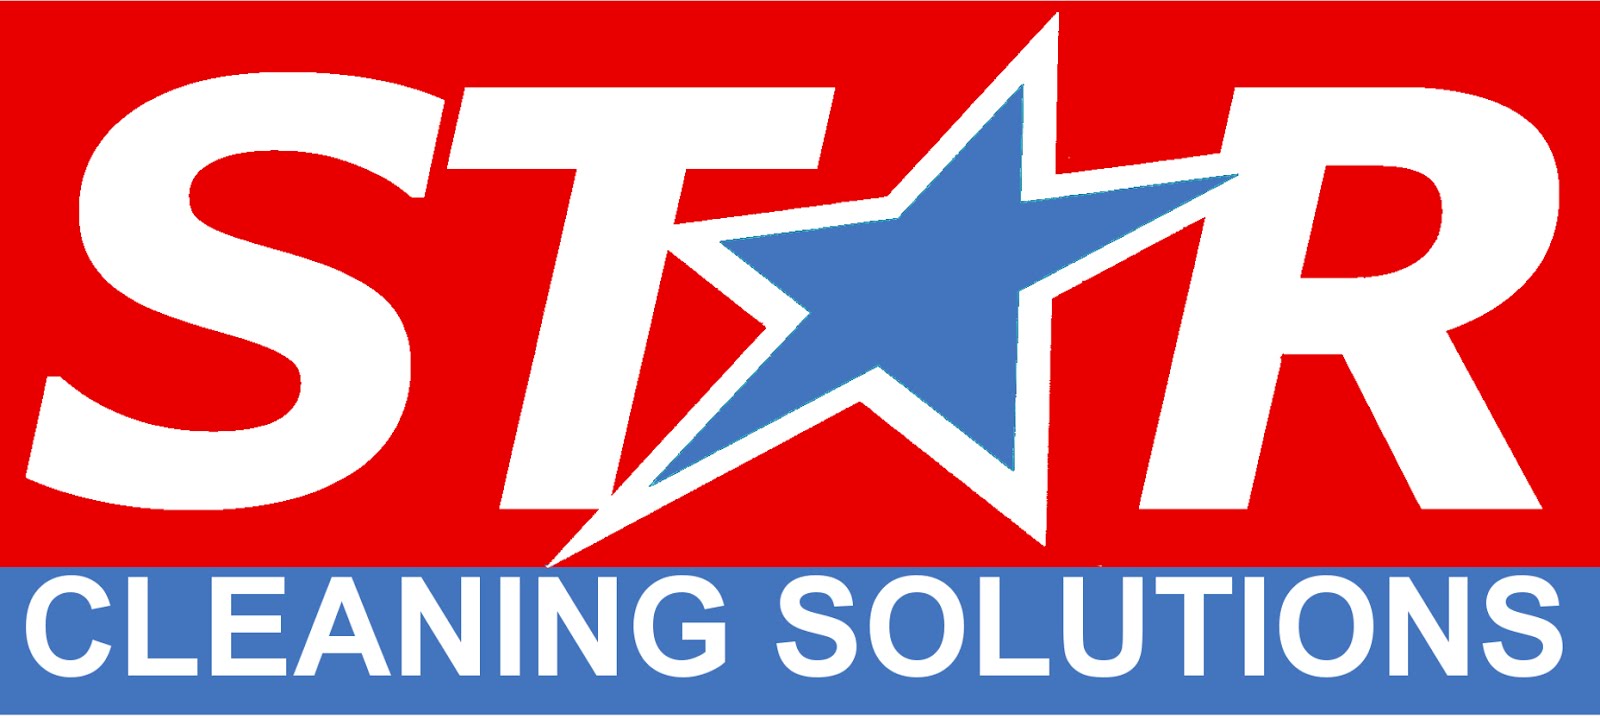 Star Cleaning Solutions